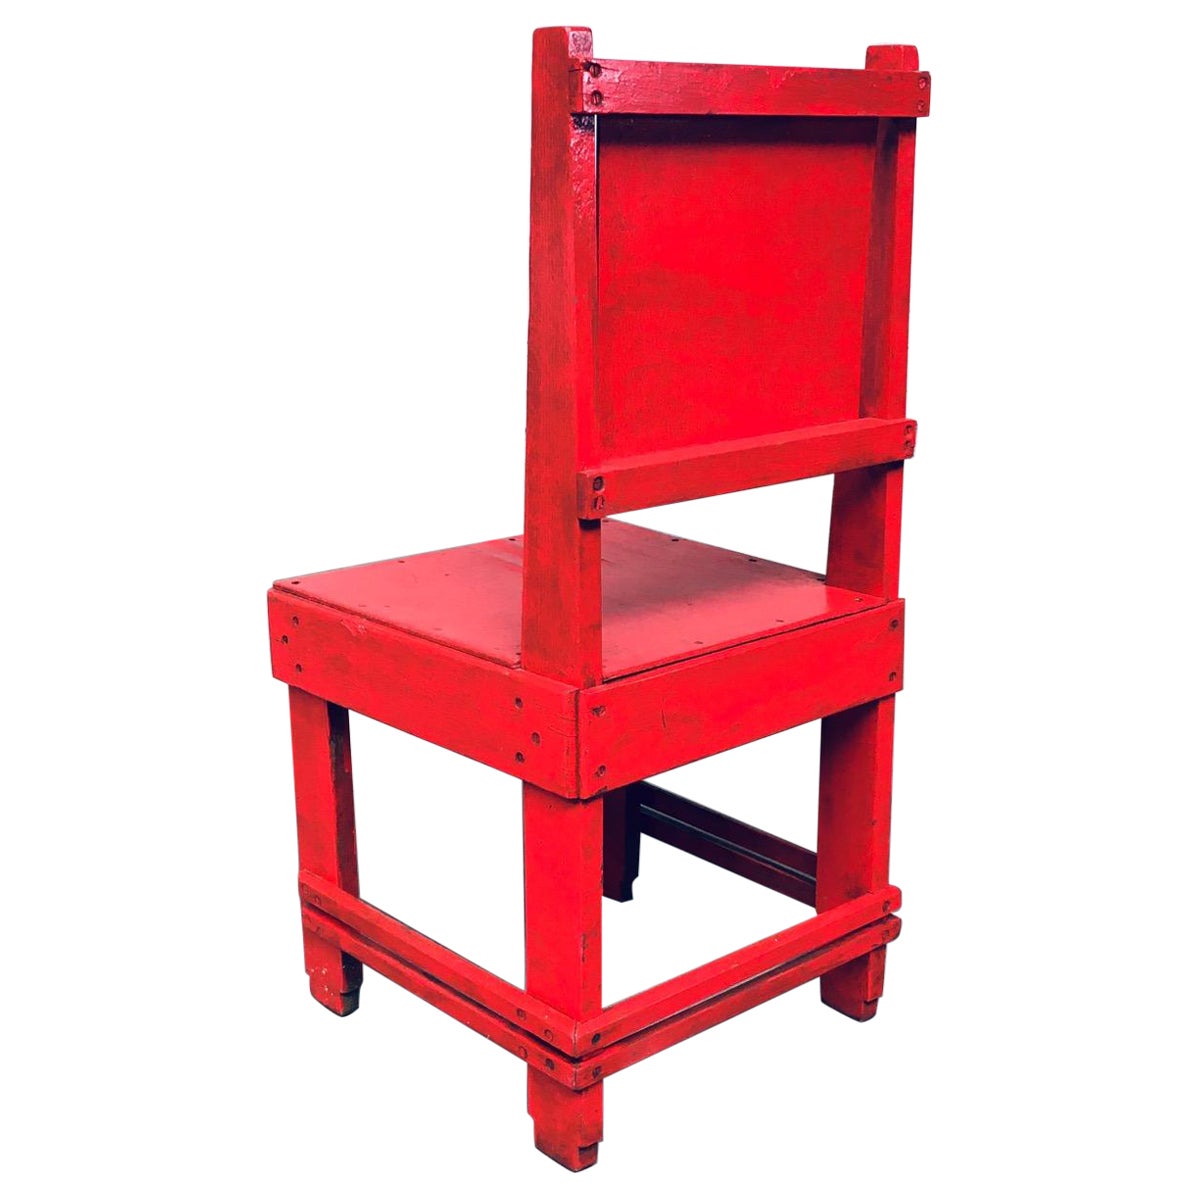 De Stijl Movement Design Red Chair Attributed to Jan Wils, 1920's Netherlands For Sale